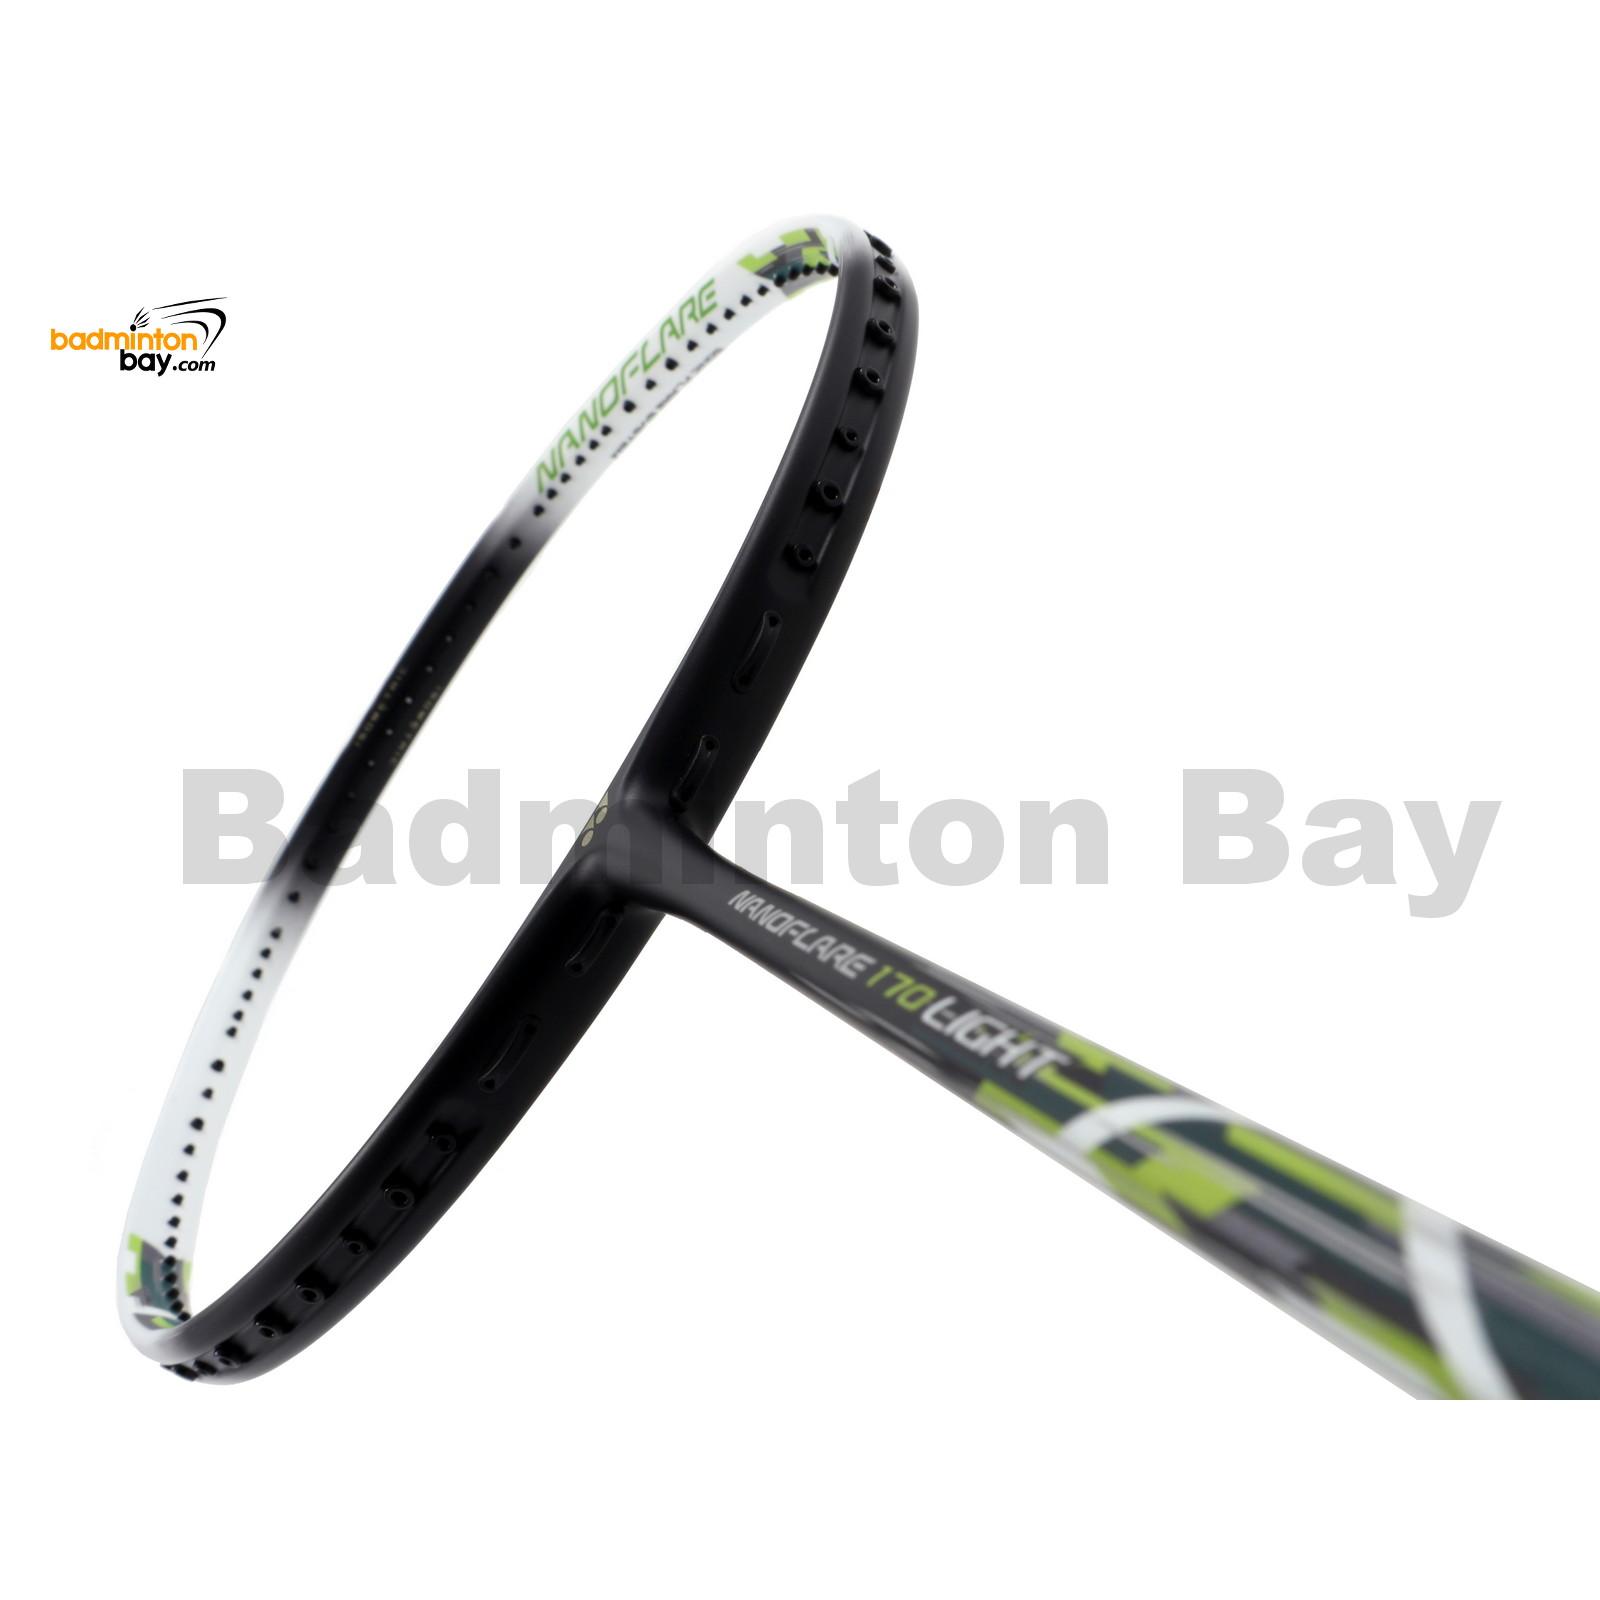 which badminton racket